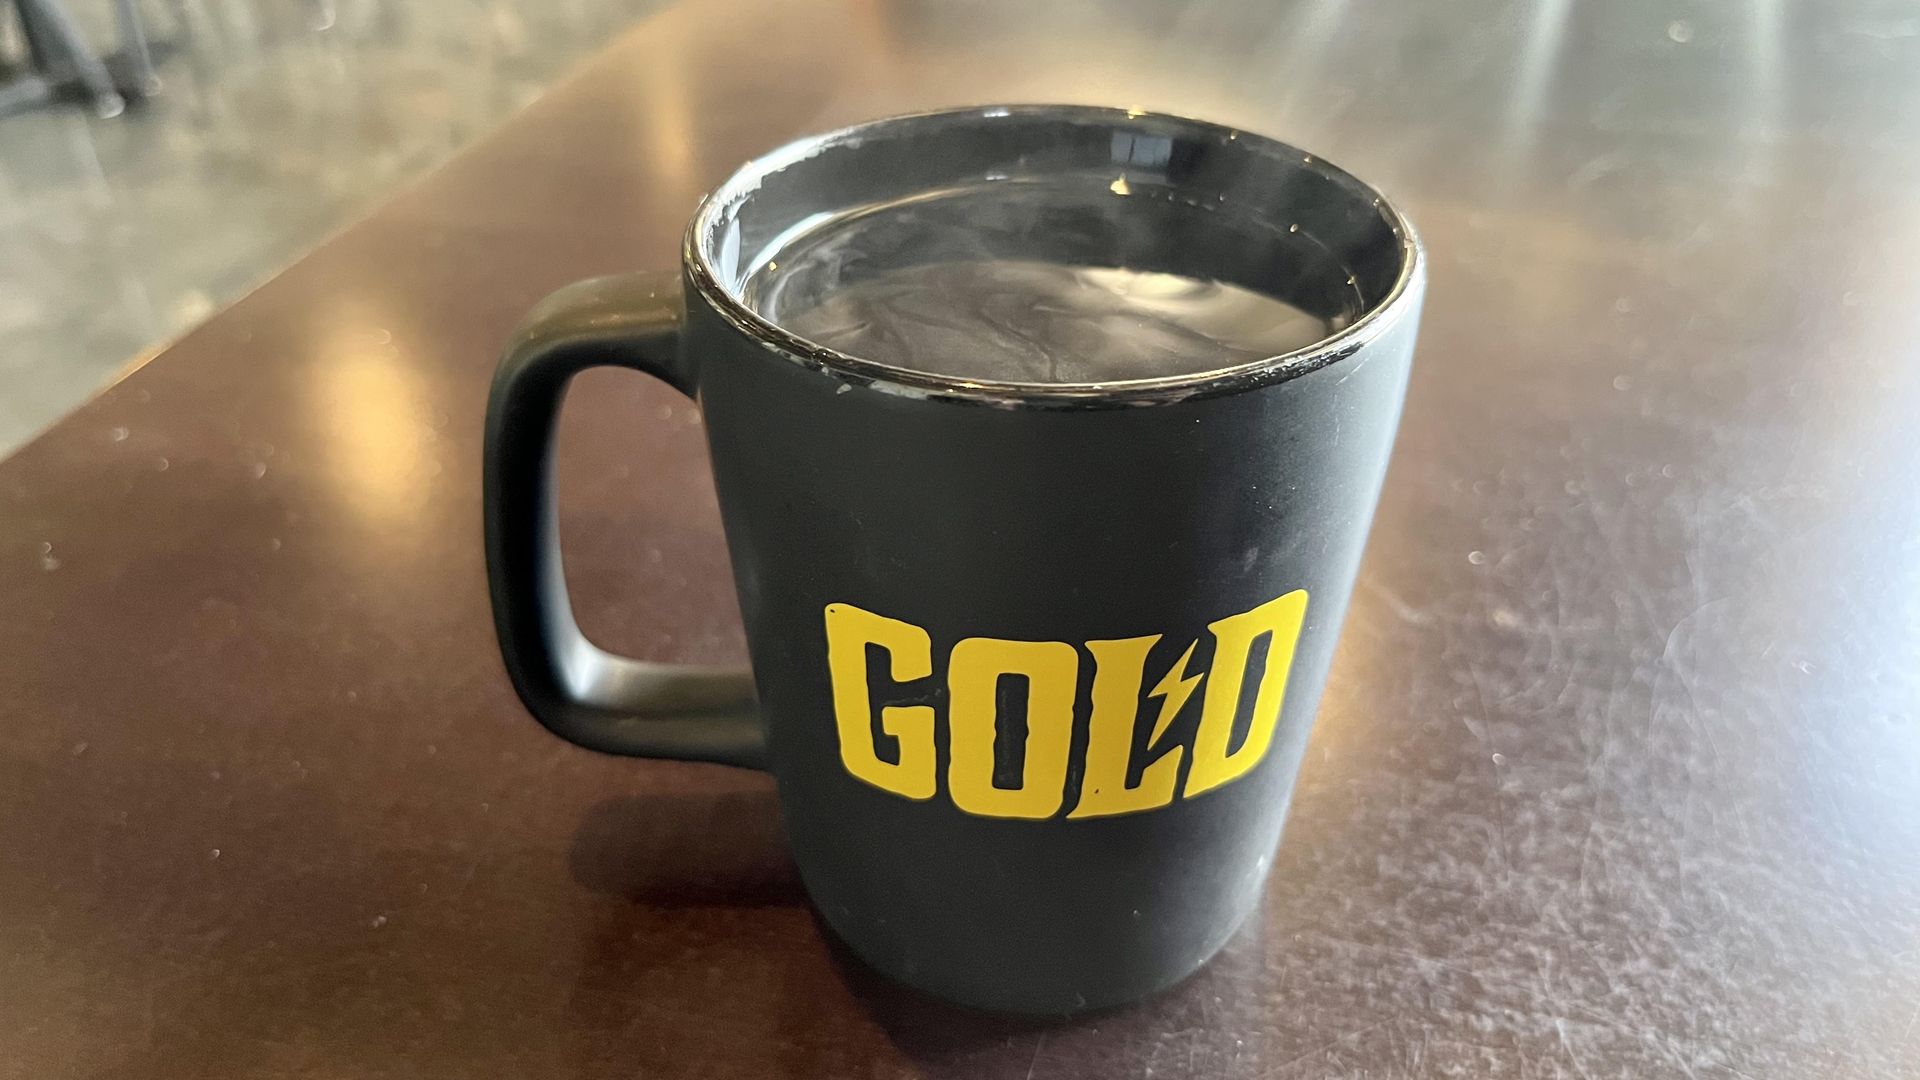 A black coffee mug with the word "Gold" in bold gold-colored text, showing steam coming off black coffee.